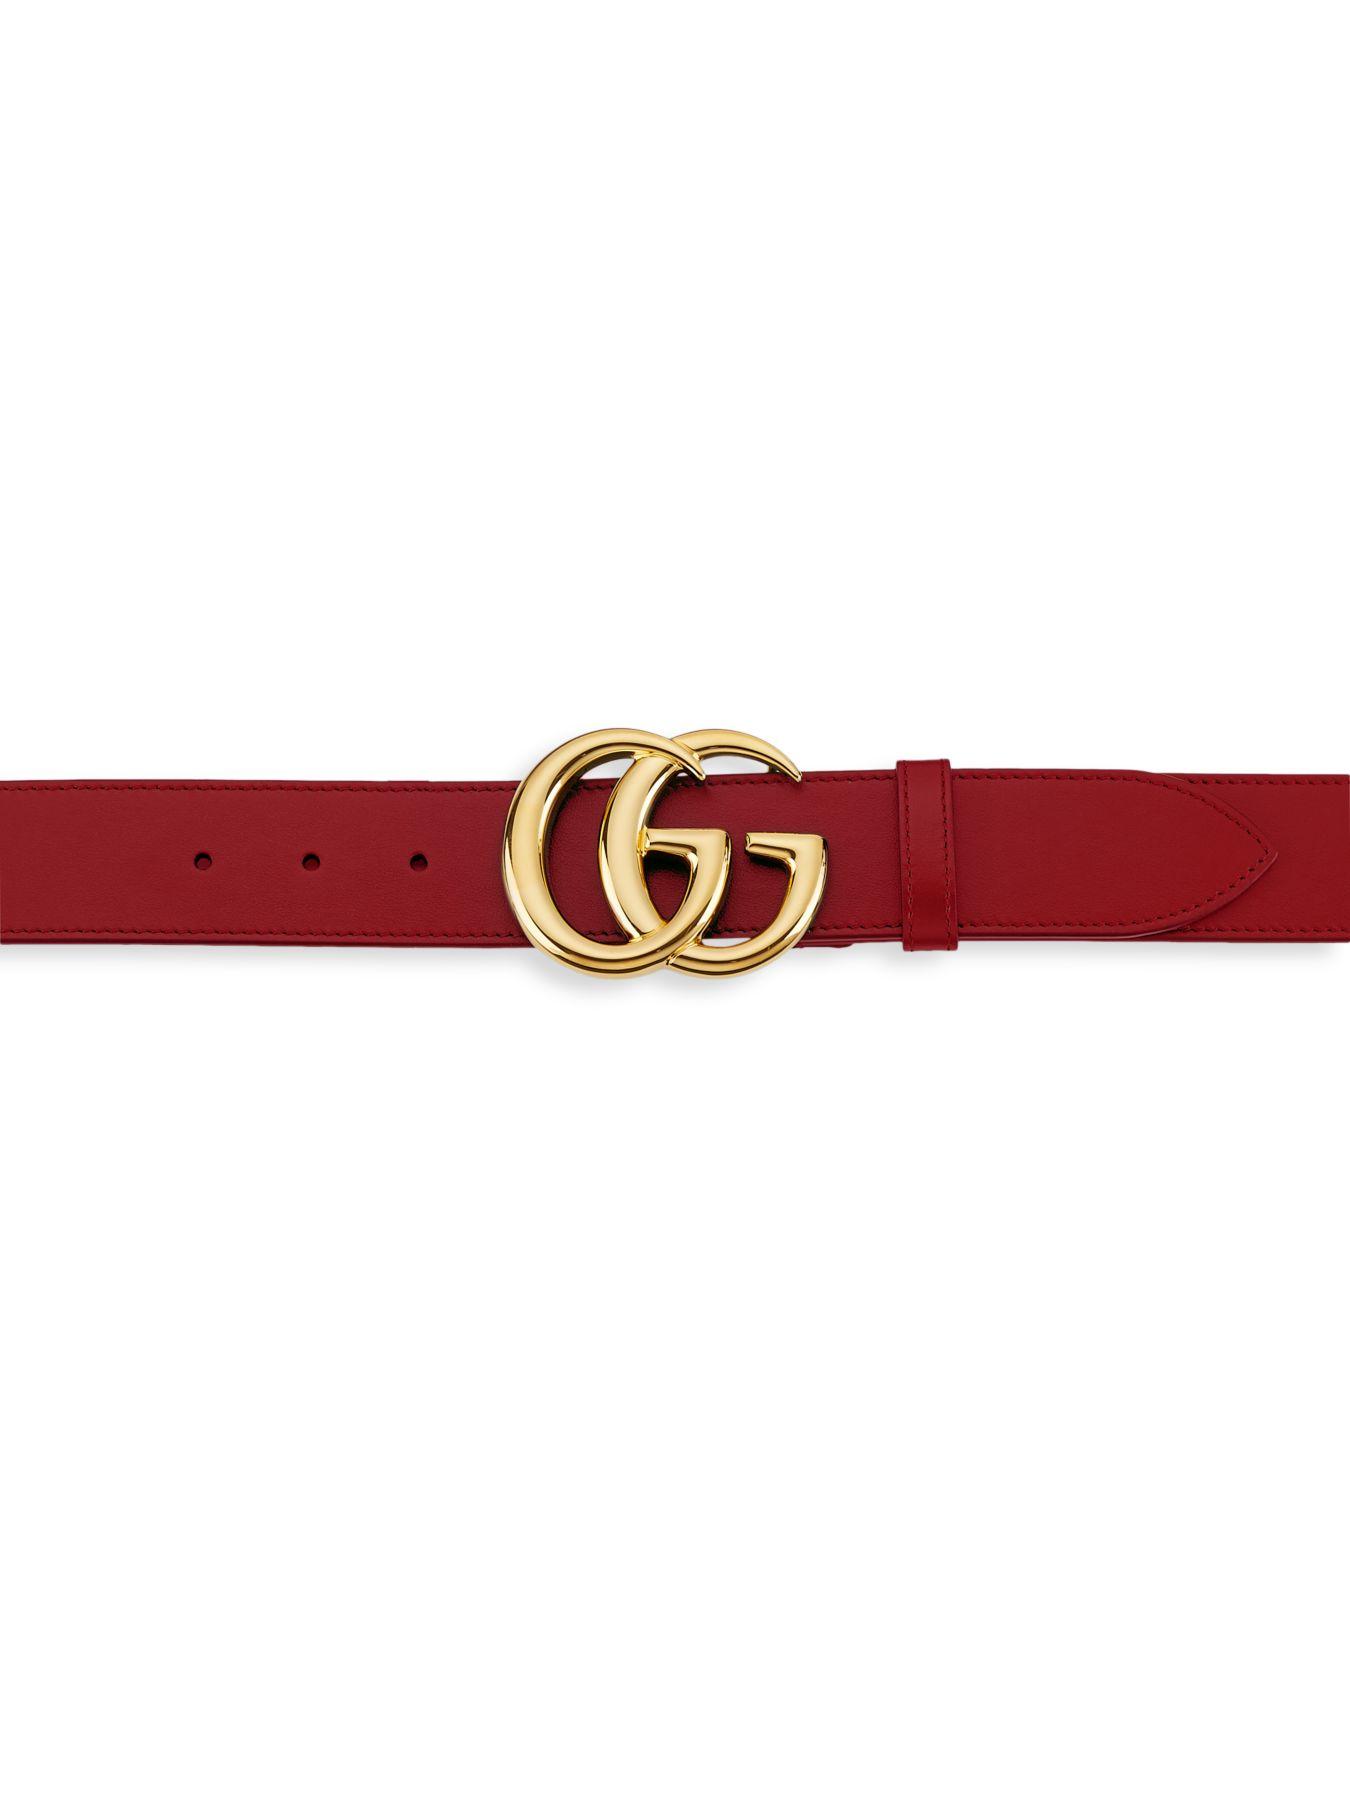 Gucci New Marmont Leather Belt in Red for Men - Lyst